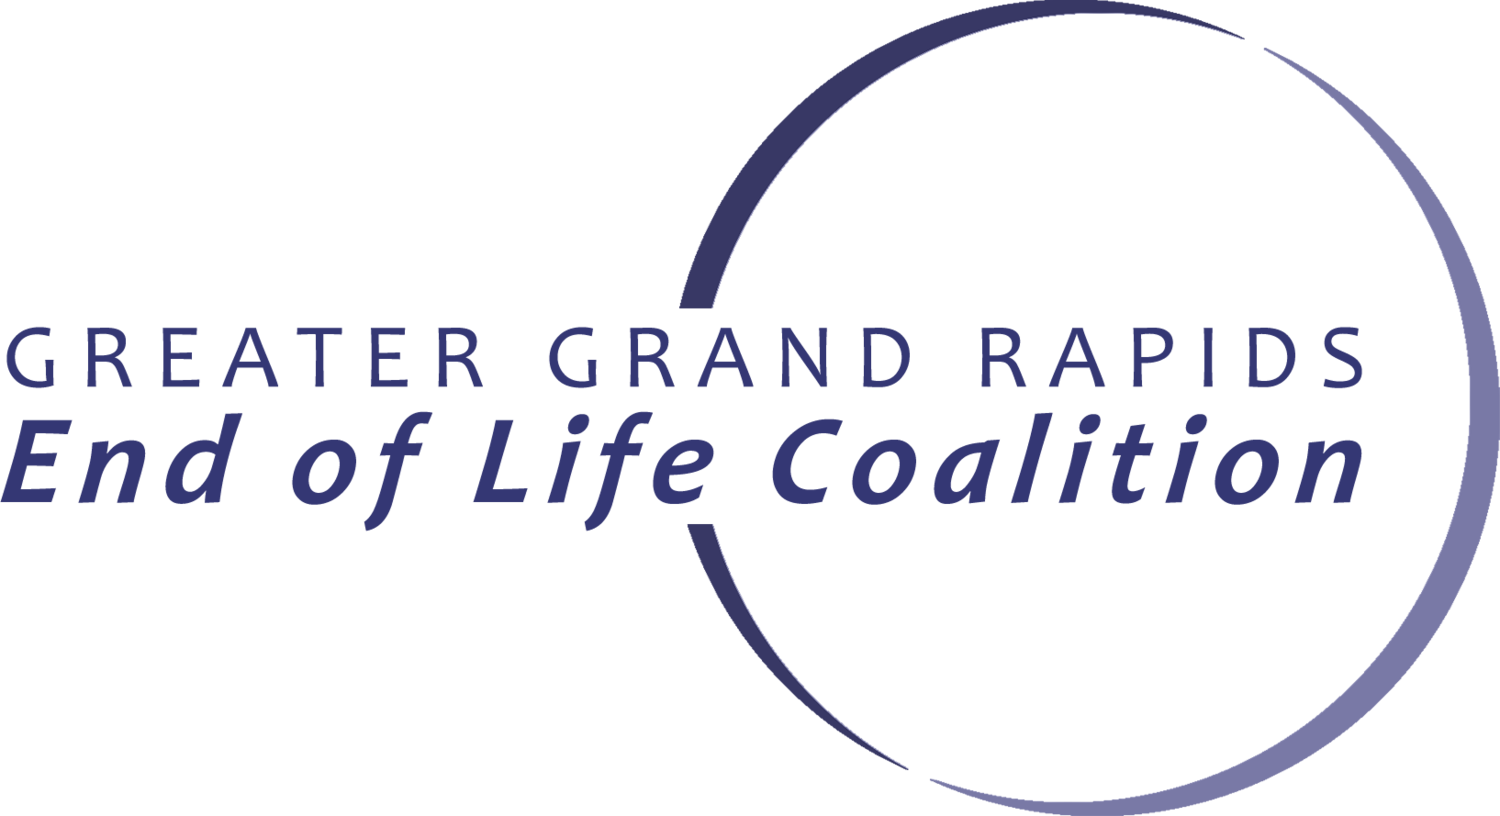 Greater Grand Rapids End of Life Coalition